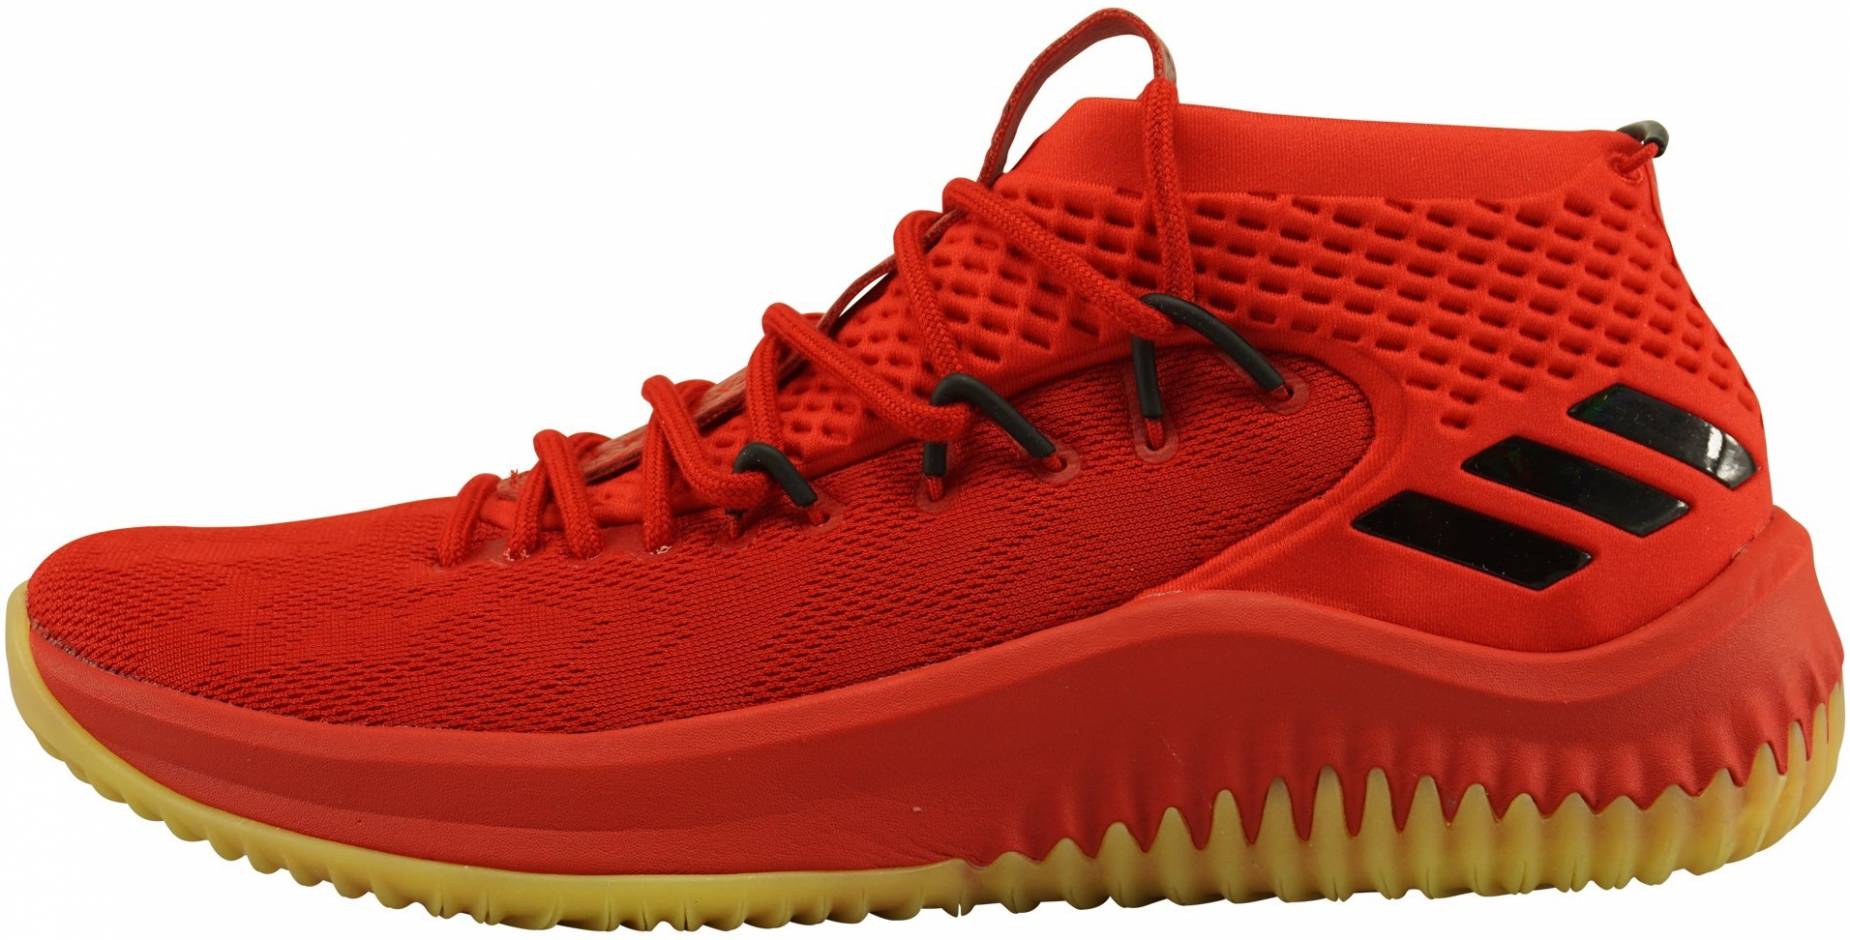 Only $55 + Review of Adidas Dame 4 